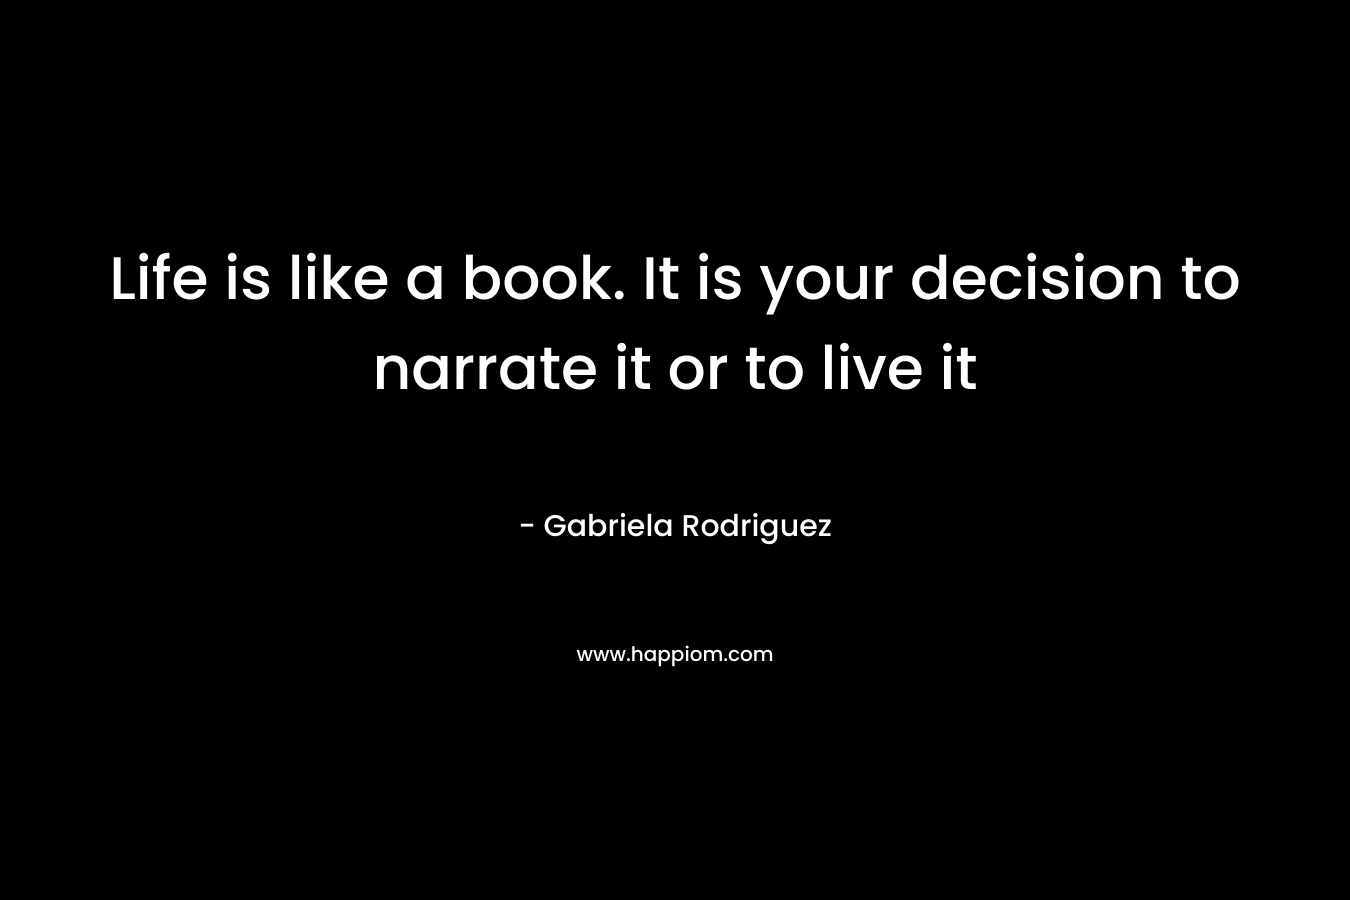 Life is like a book. It is your decision to narrate it or to live it